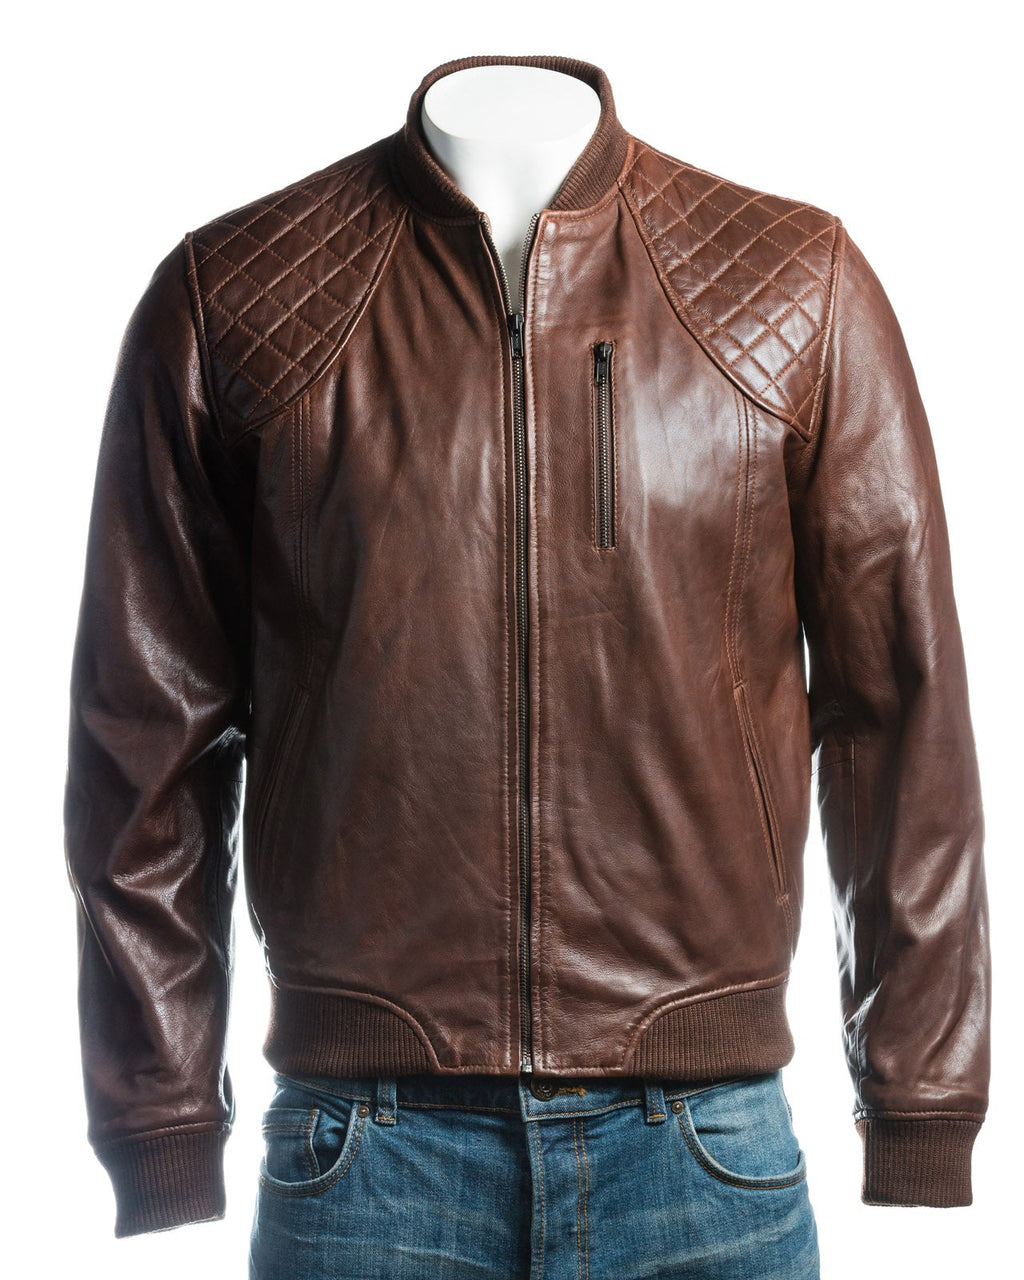 Men's Antique Brown Leather Rib Knit Collar Bomber Jacket With Diamond Shoulder Stitch Detail: Romeo